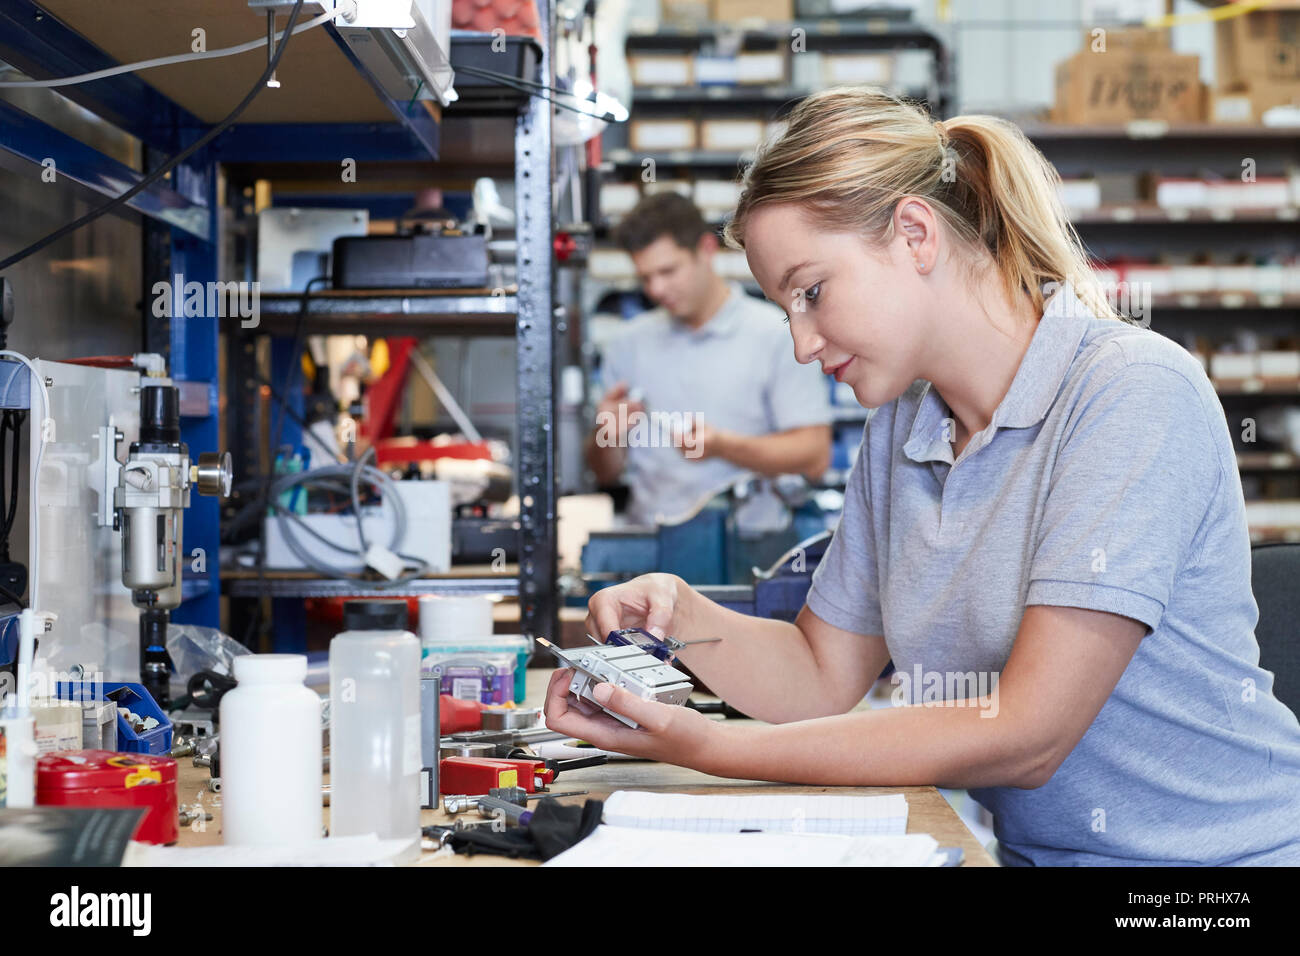 Female Engineer In Factory Measuring Component At Work Bench Using Micrometer Stock Photo